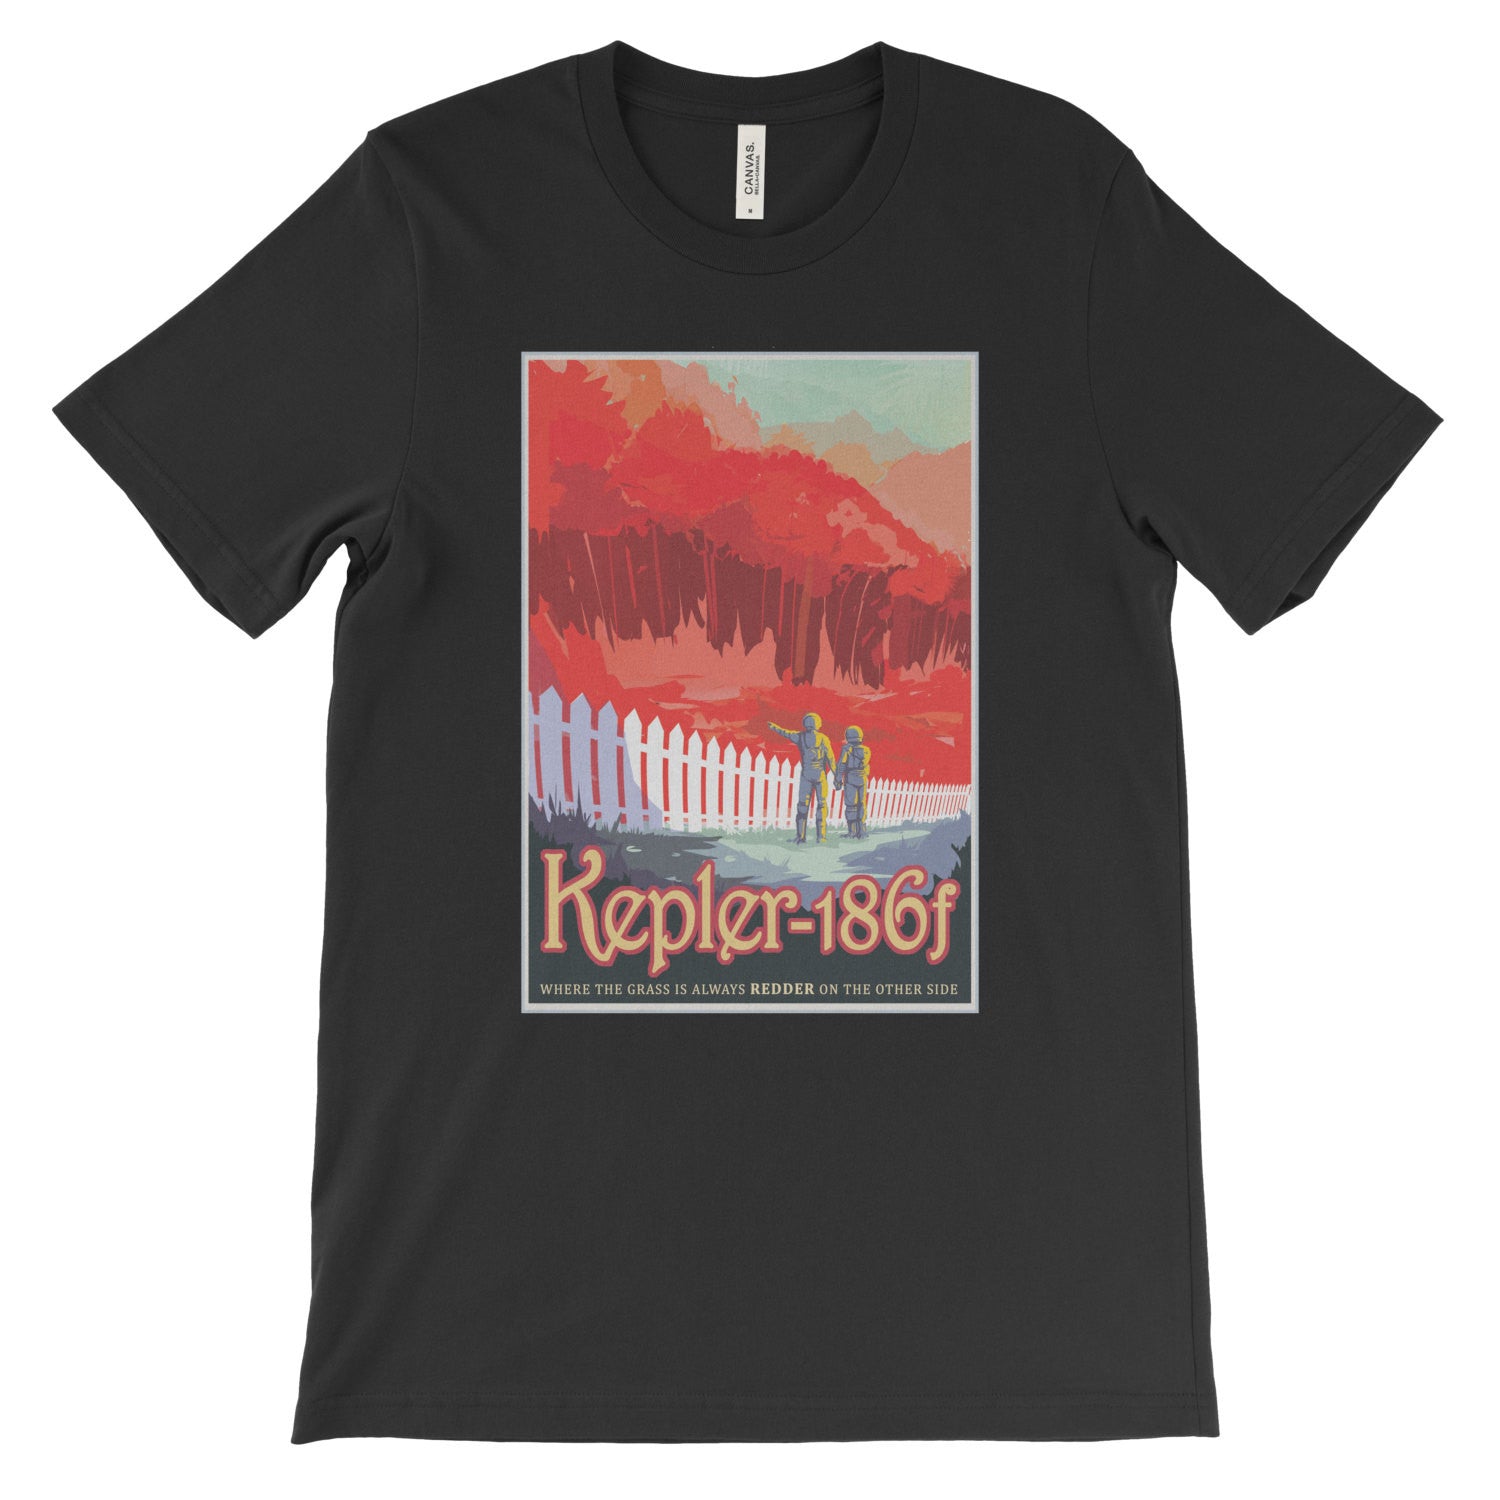 Kepler-186f T-Shirt from NASA's Visions of the Future - Mighty Circus